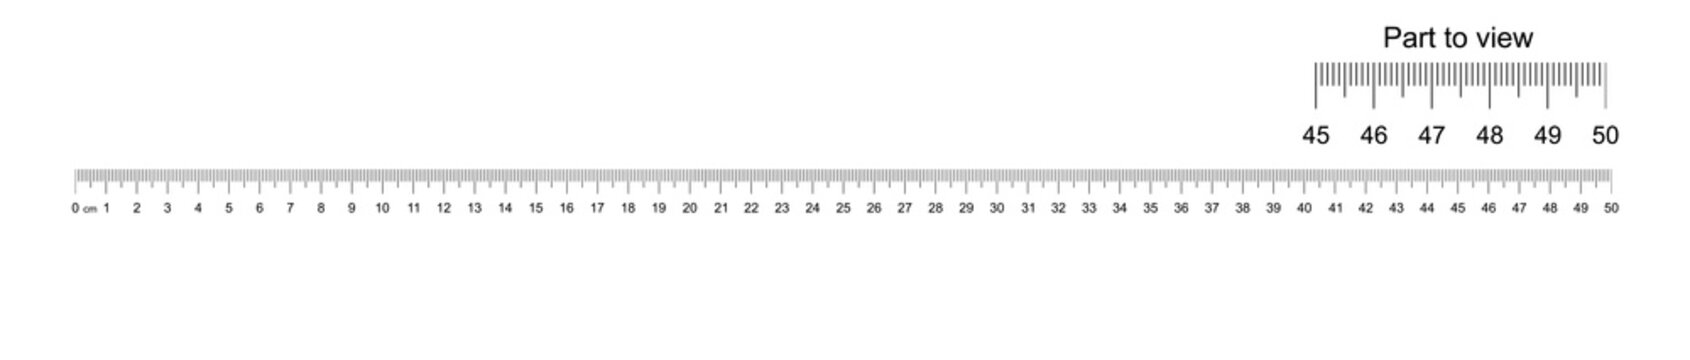 Ruler 50 cm with part to view. Measuring tool. Ruler scale. Ruler grid 50 cm. Size indicator units. Metric Centimeter size indicators. Vector